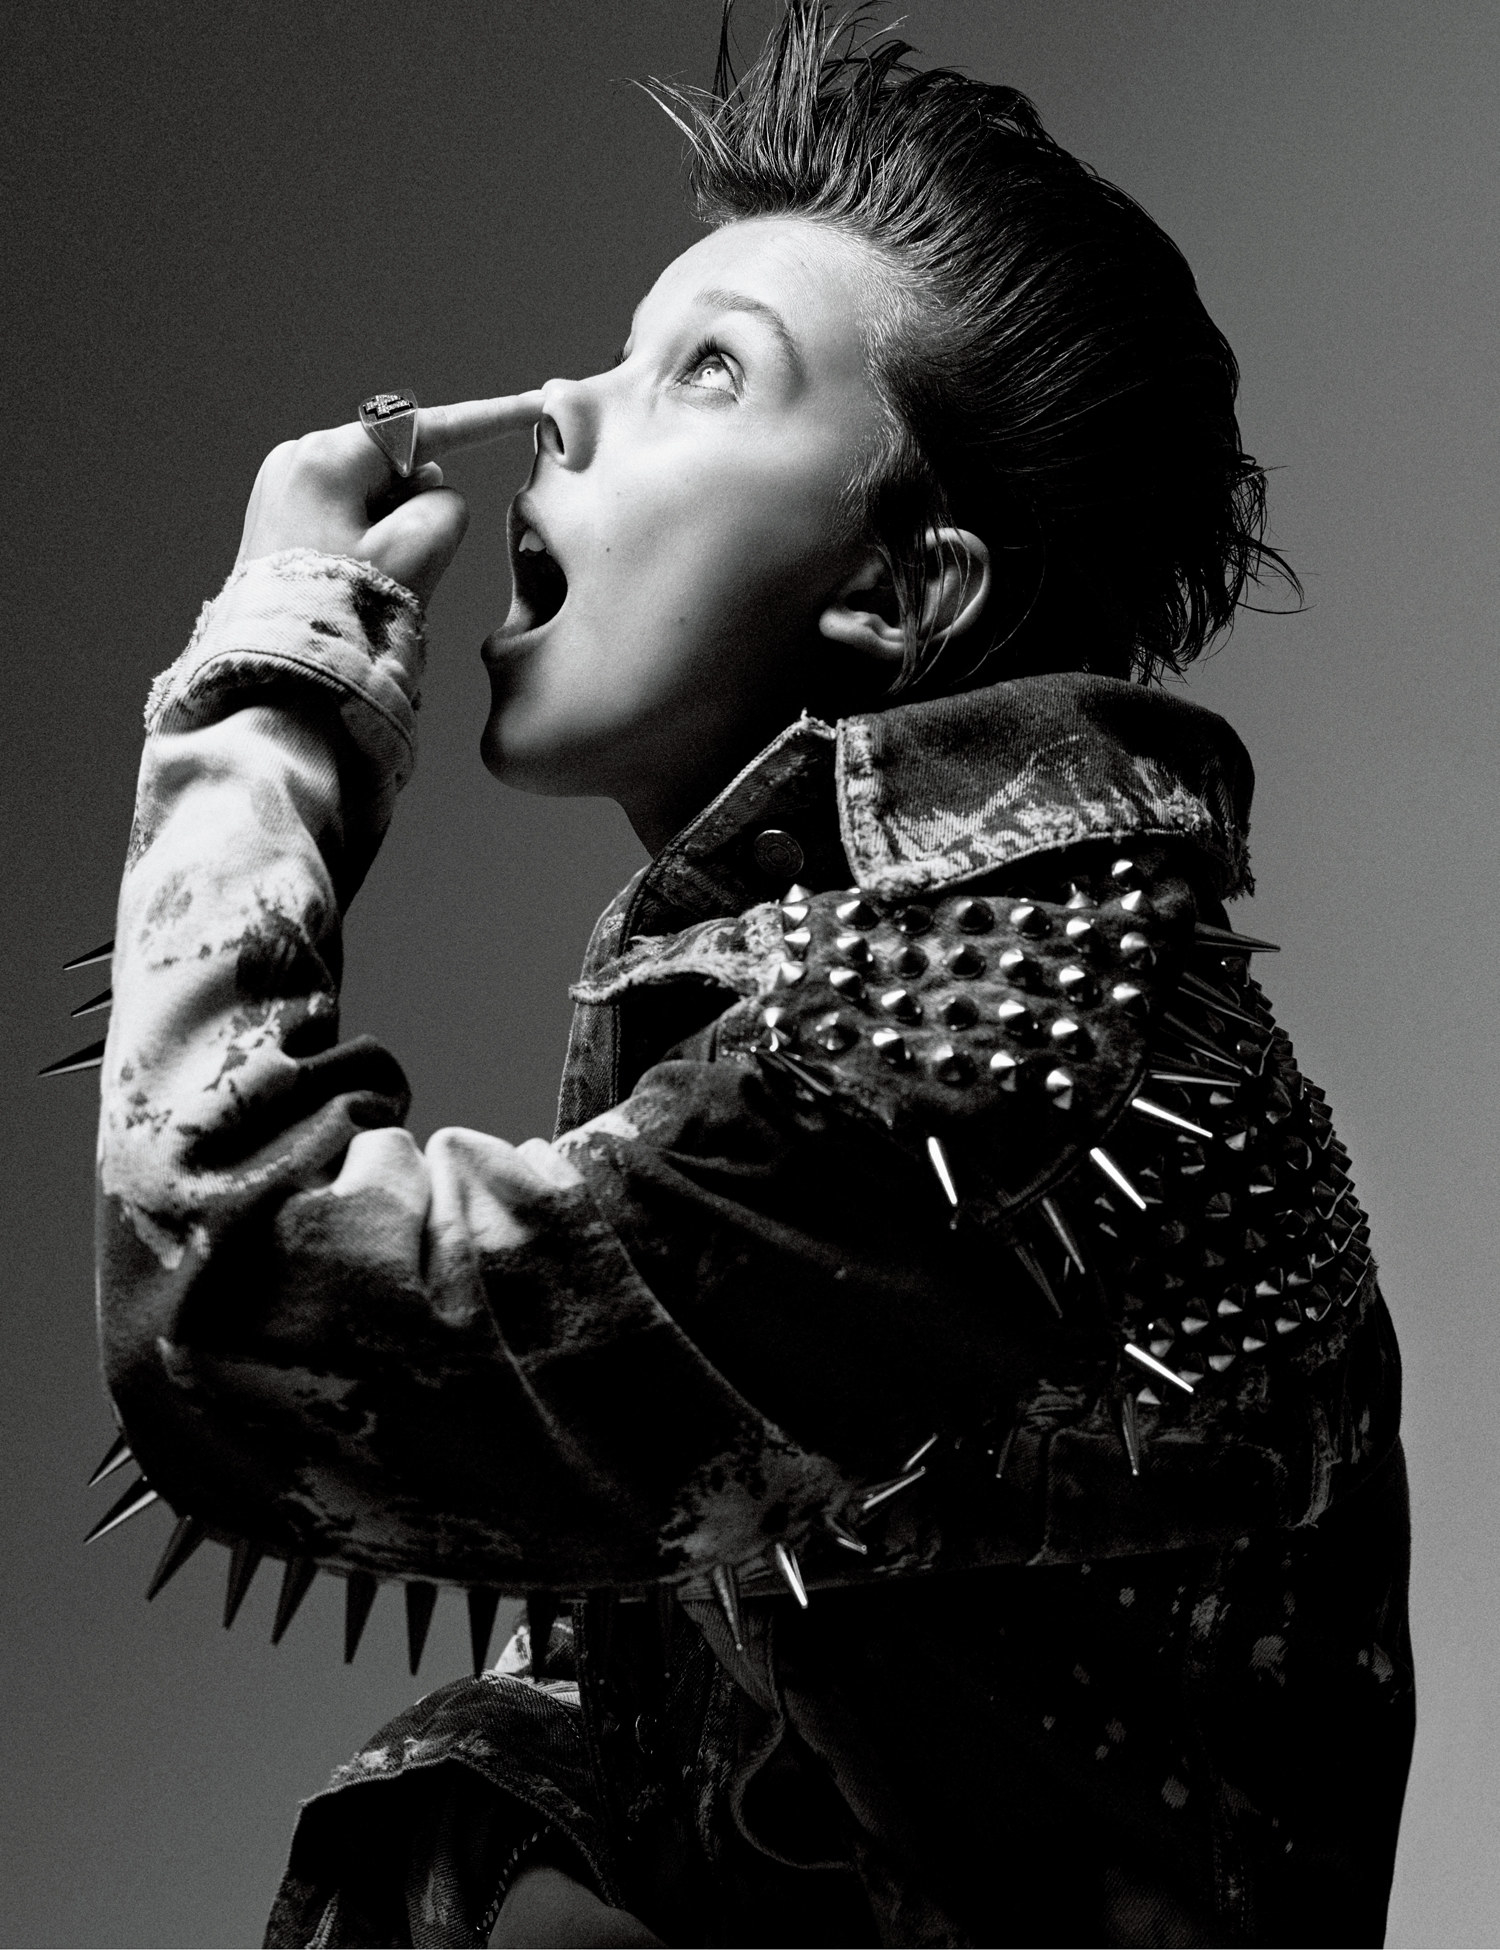 Millie Bobby Brown Manages To Be More Badass Than Eleven In This Photoshoot